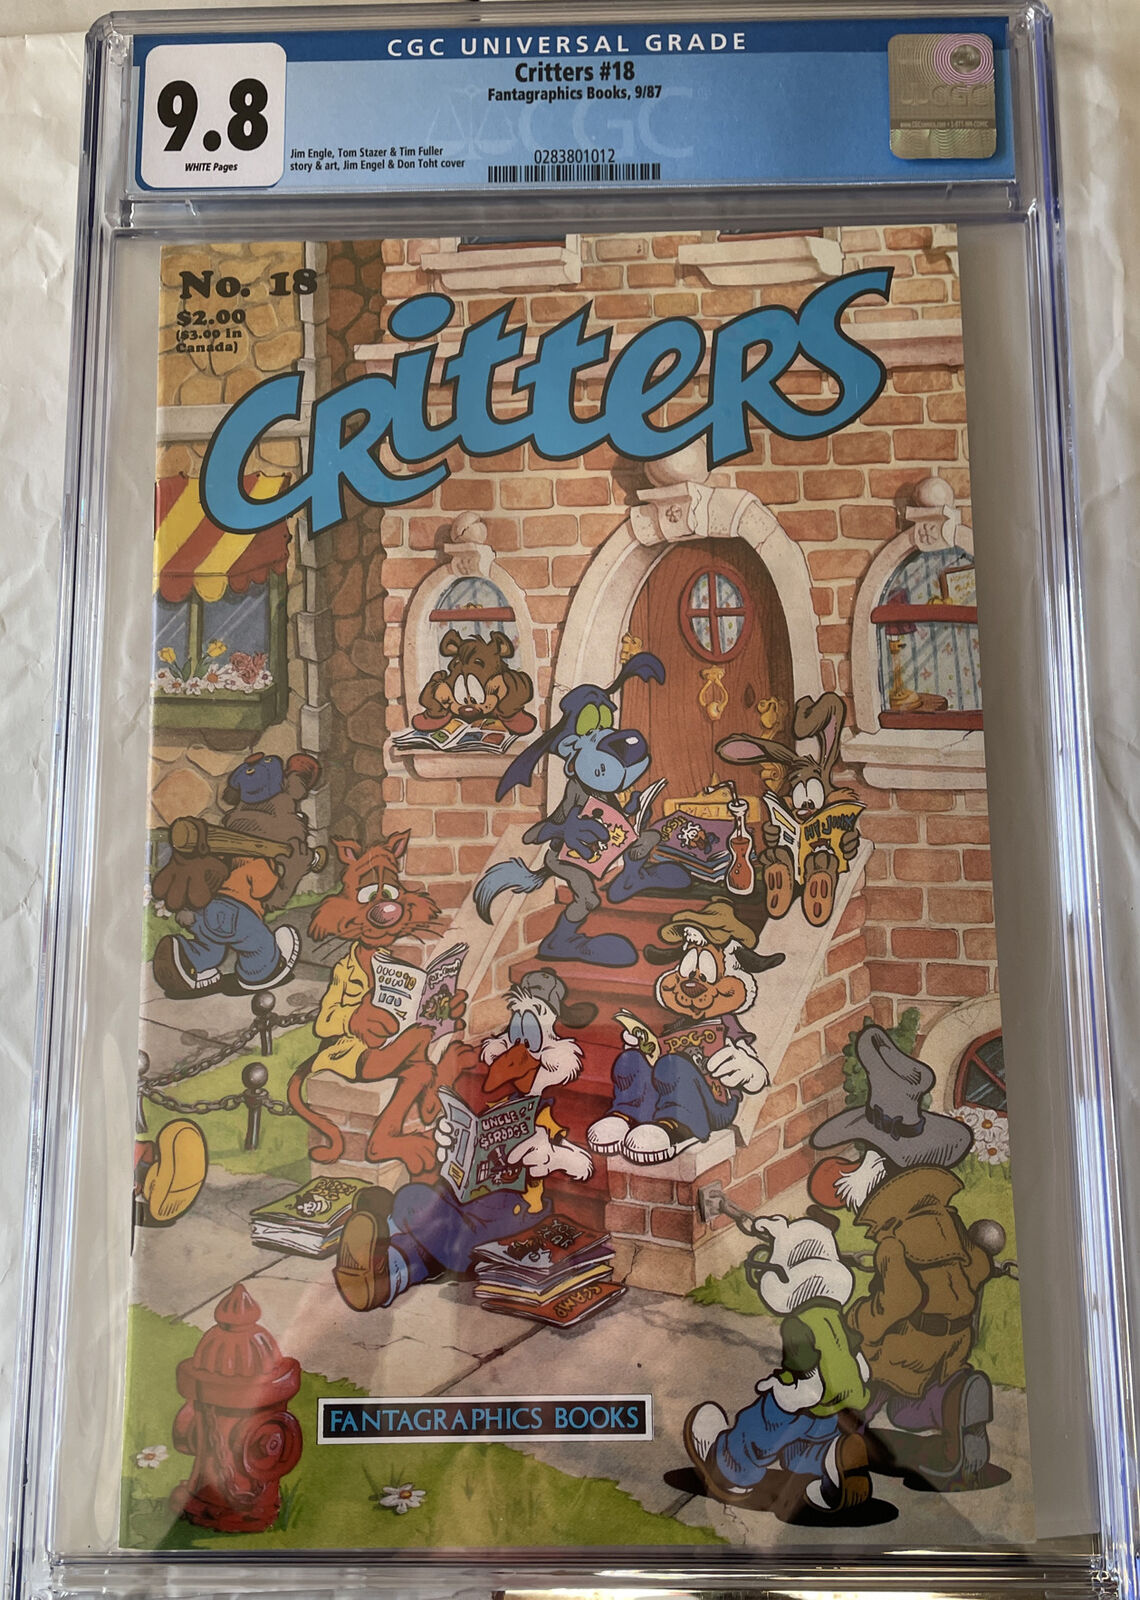 Fantagraphics Books Critters #18 CGC 9.8 Only one in census